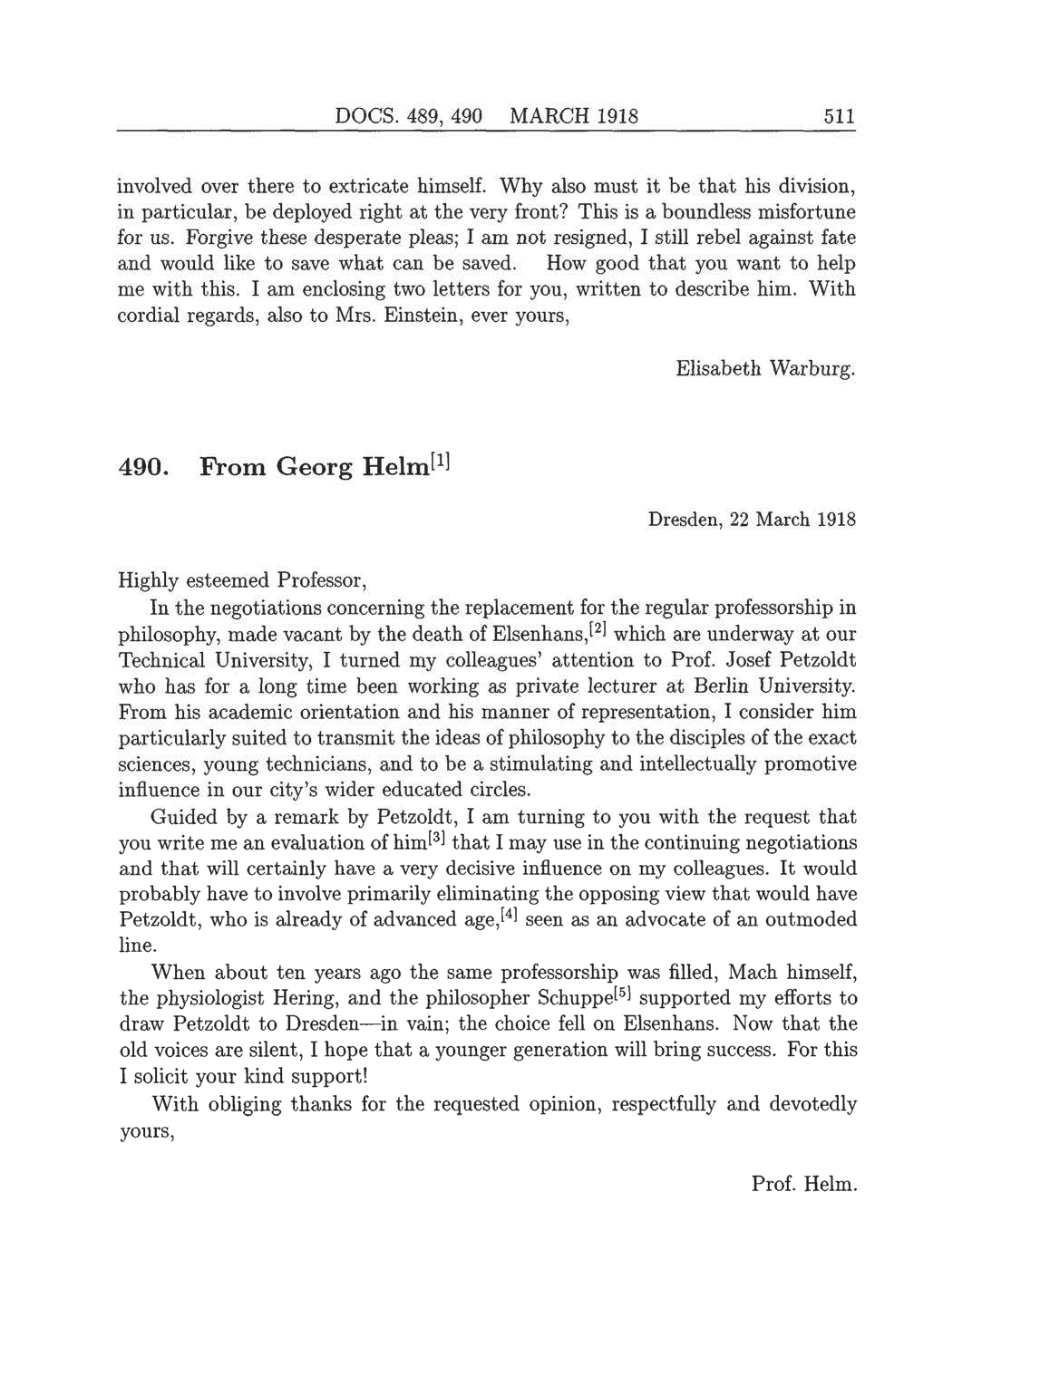 Volume 8: The Berlin Years: Correspondence, 1914-1918 (English translation supplement) page 511